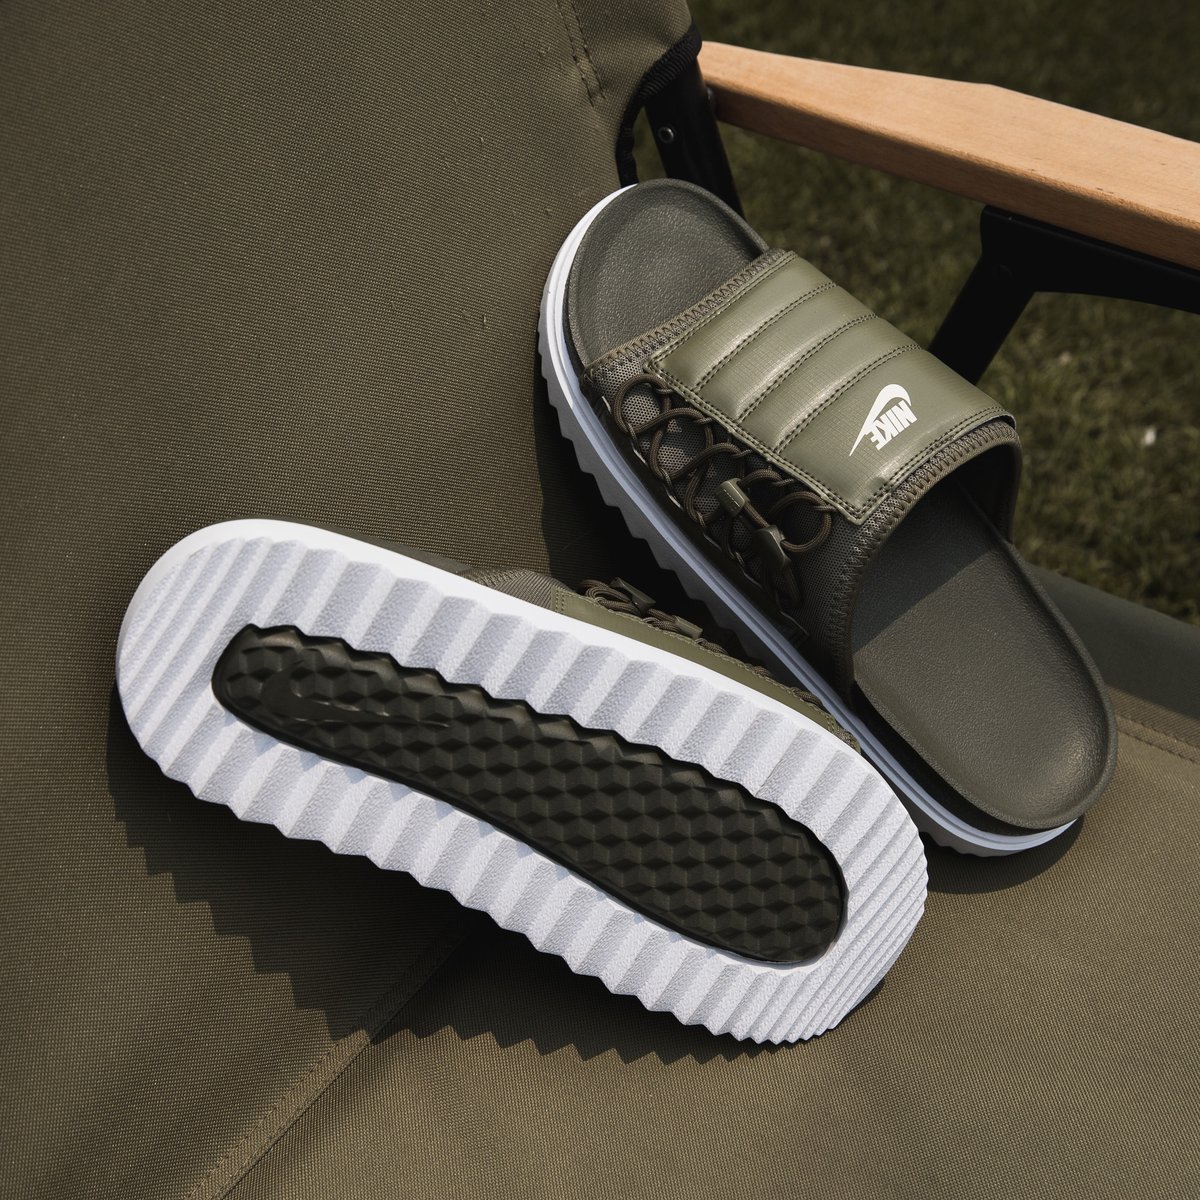 Kicks Deals Canada A Twitter A Great Looking Pair Of Slides For The Summer That Won T Break The Bank You Won T Want To Miss Our On These Two Simple Colourways Of The